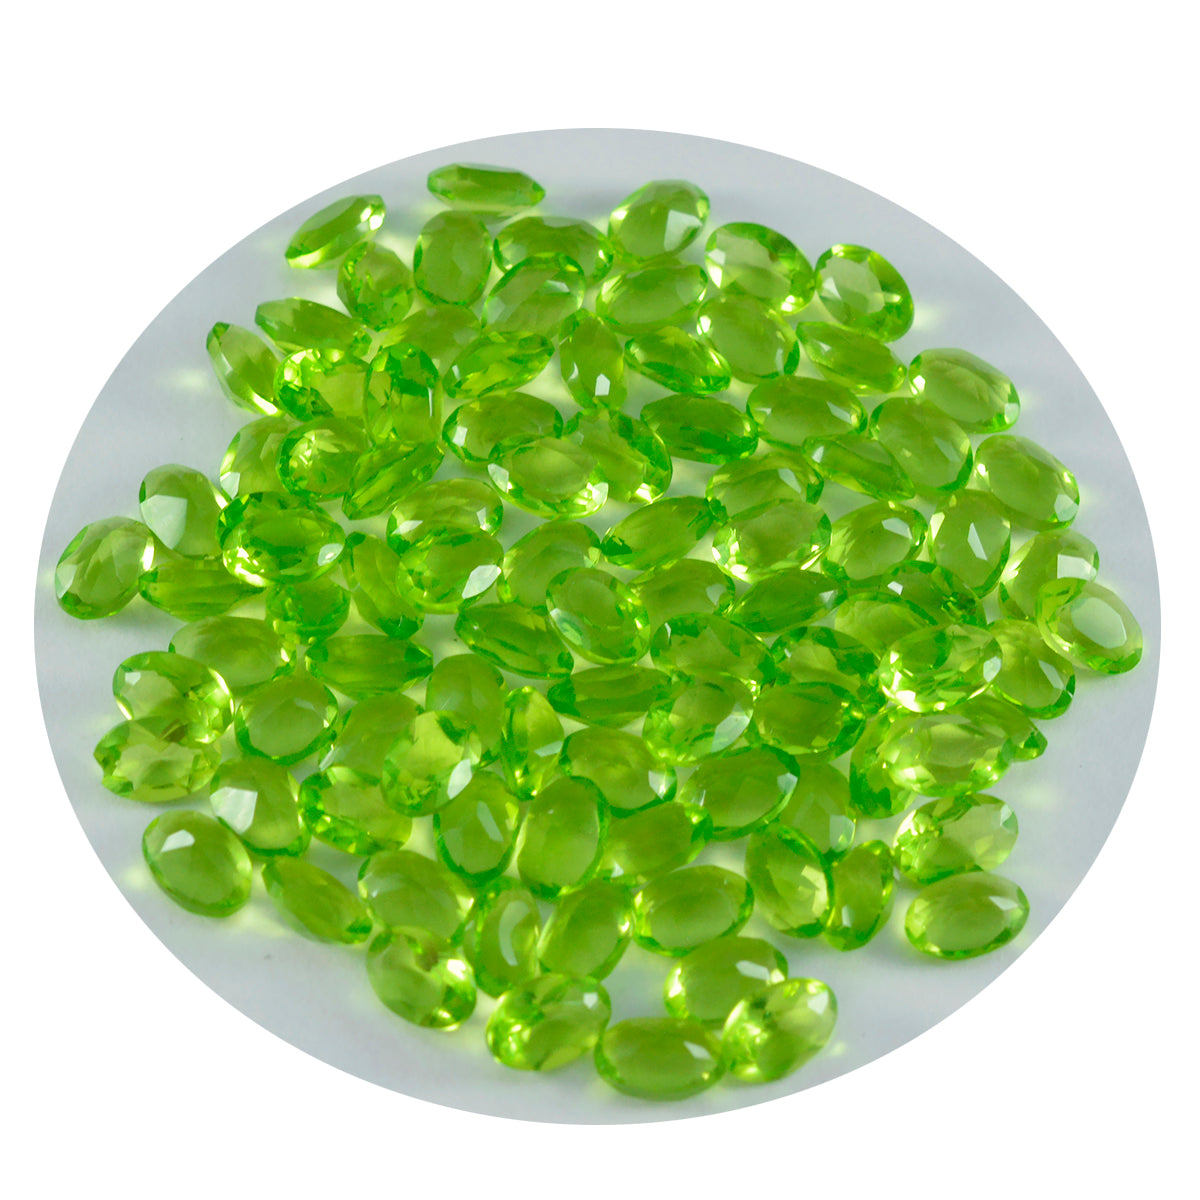 Riyogems 1PC Green Peridot CZ Faceted 3x5 mm Oval Shape attractive Quality Gemstone